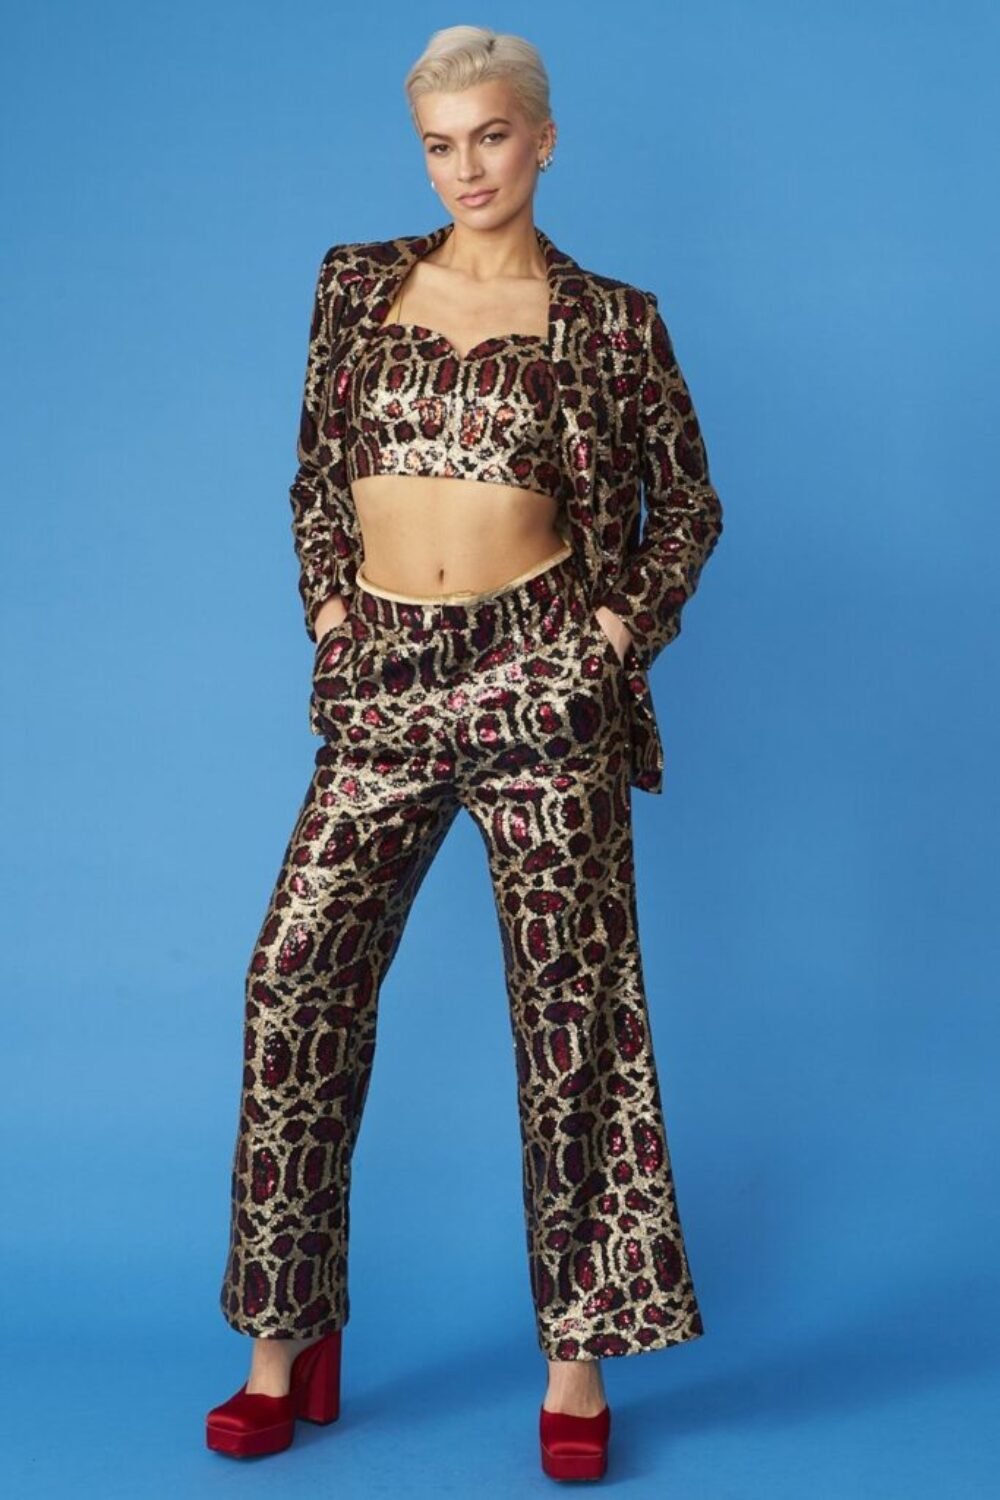 Shop Pink Animal Print Sequin Trousers and women's luxury and designer clothes at www.lux-apparel.co.uk